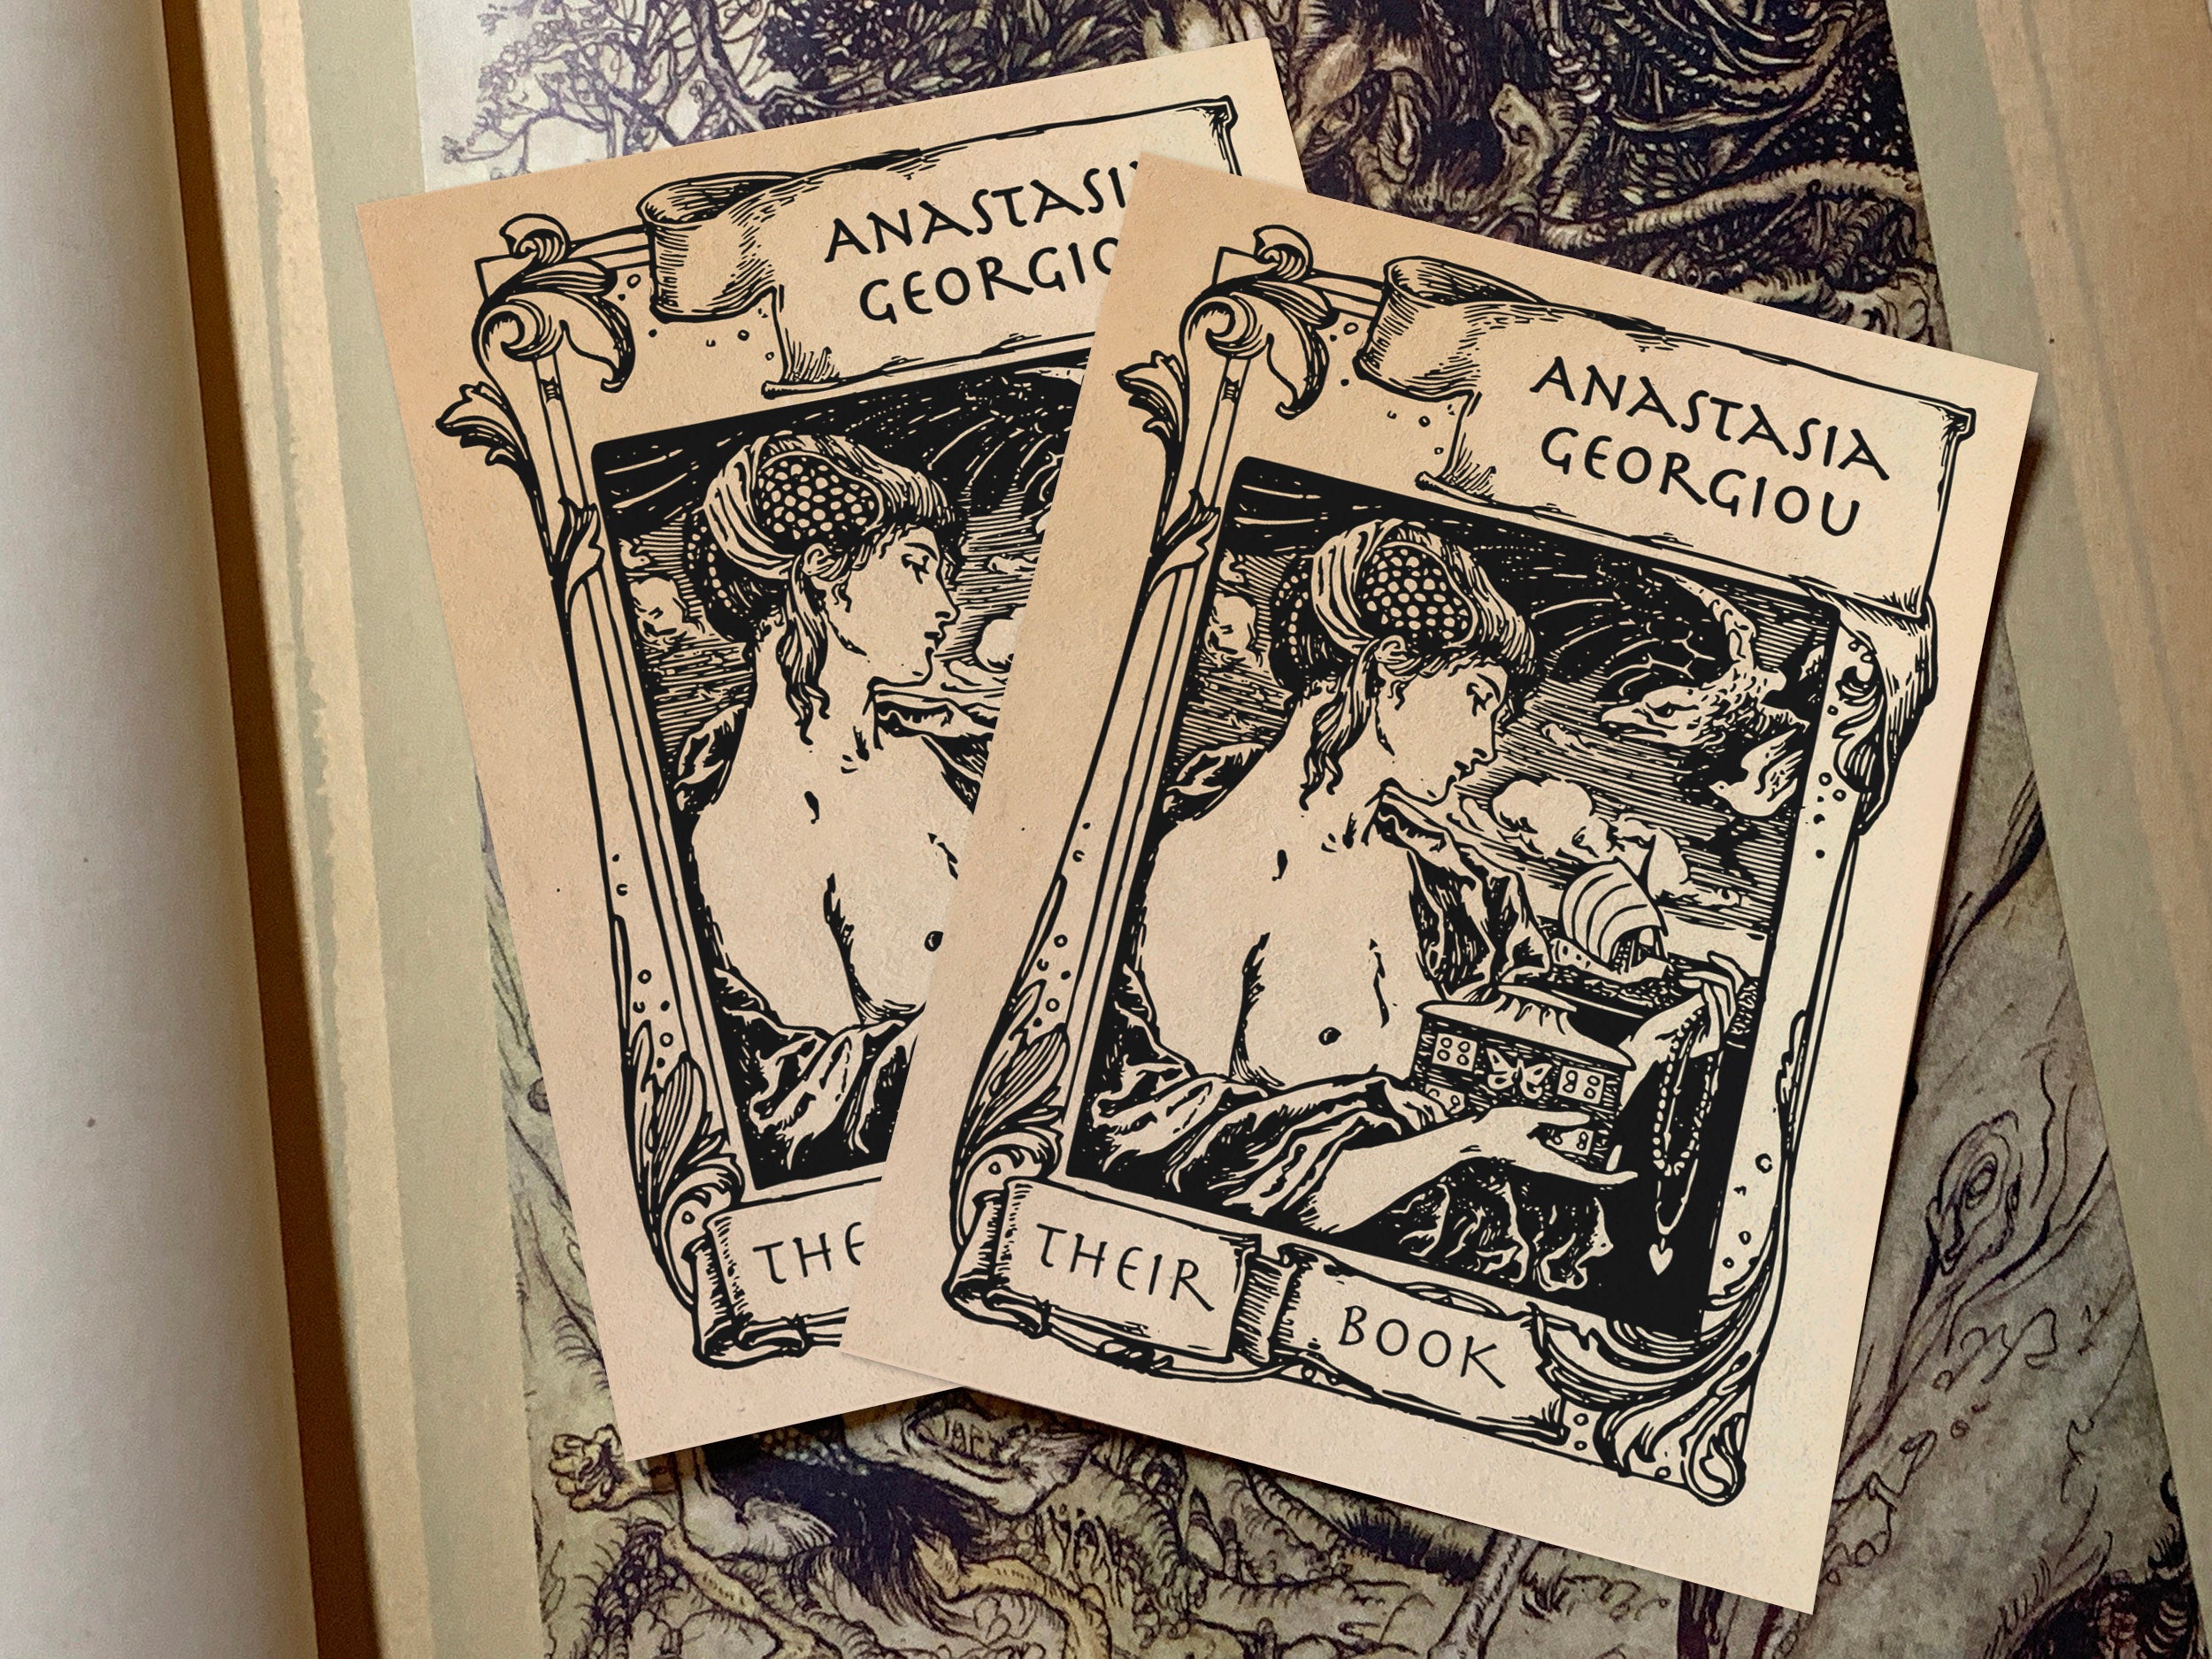 Pandora's Box, Personalized Erotic Ex-Libris Bookplates, Crafted on Traditional Gummed Paper, 3in x 4in, Set of 30